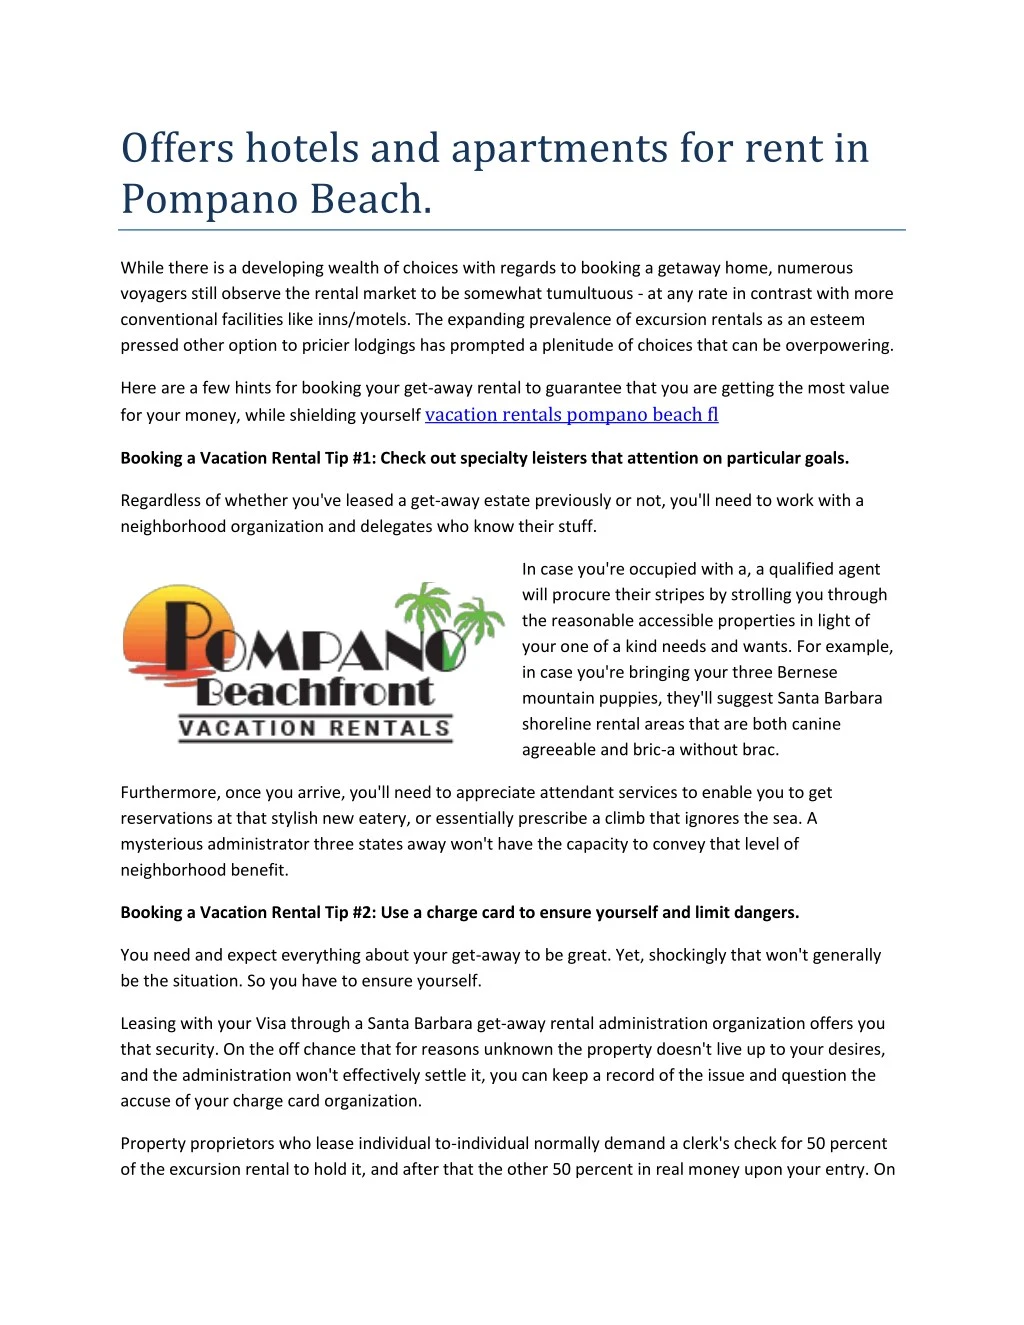 offers hotels and apartments for rent in pompano